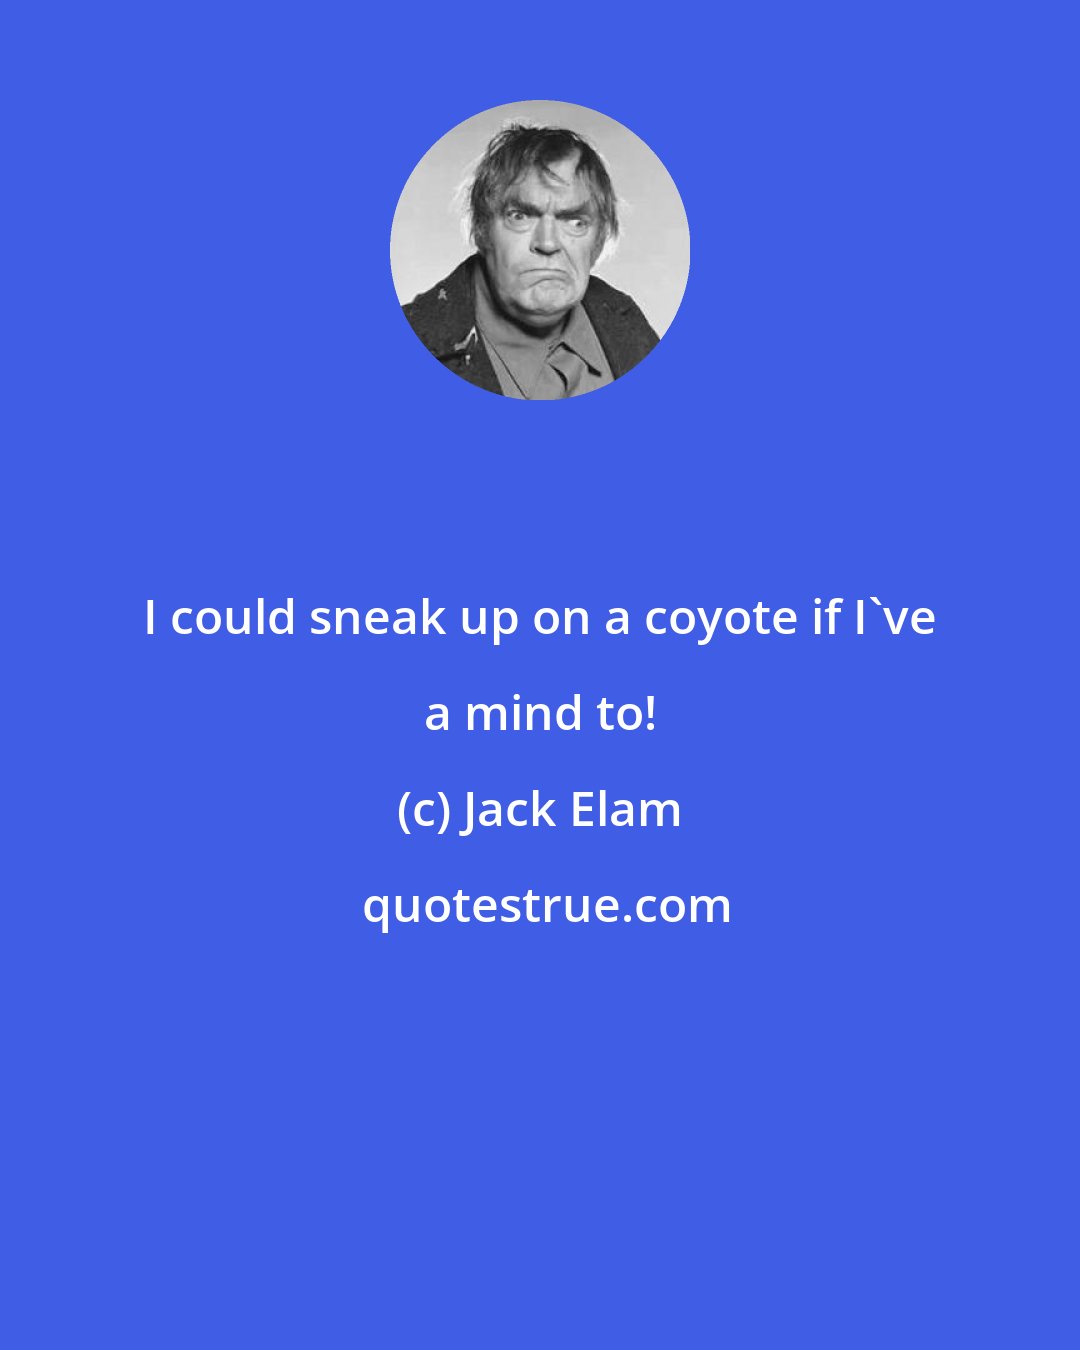 Jack Elam: I could sneak up on a coyote if I've a mind to!